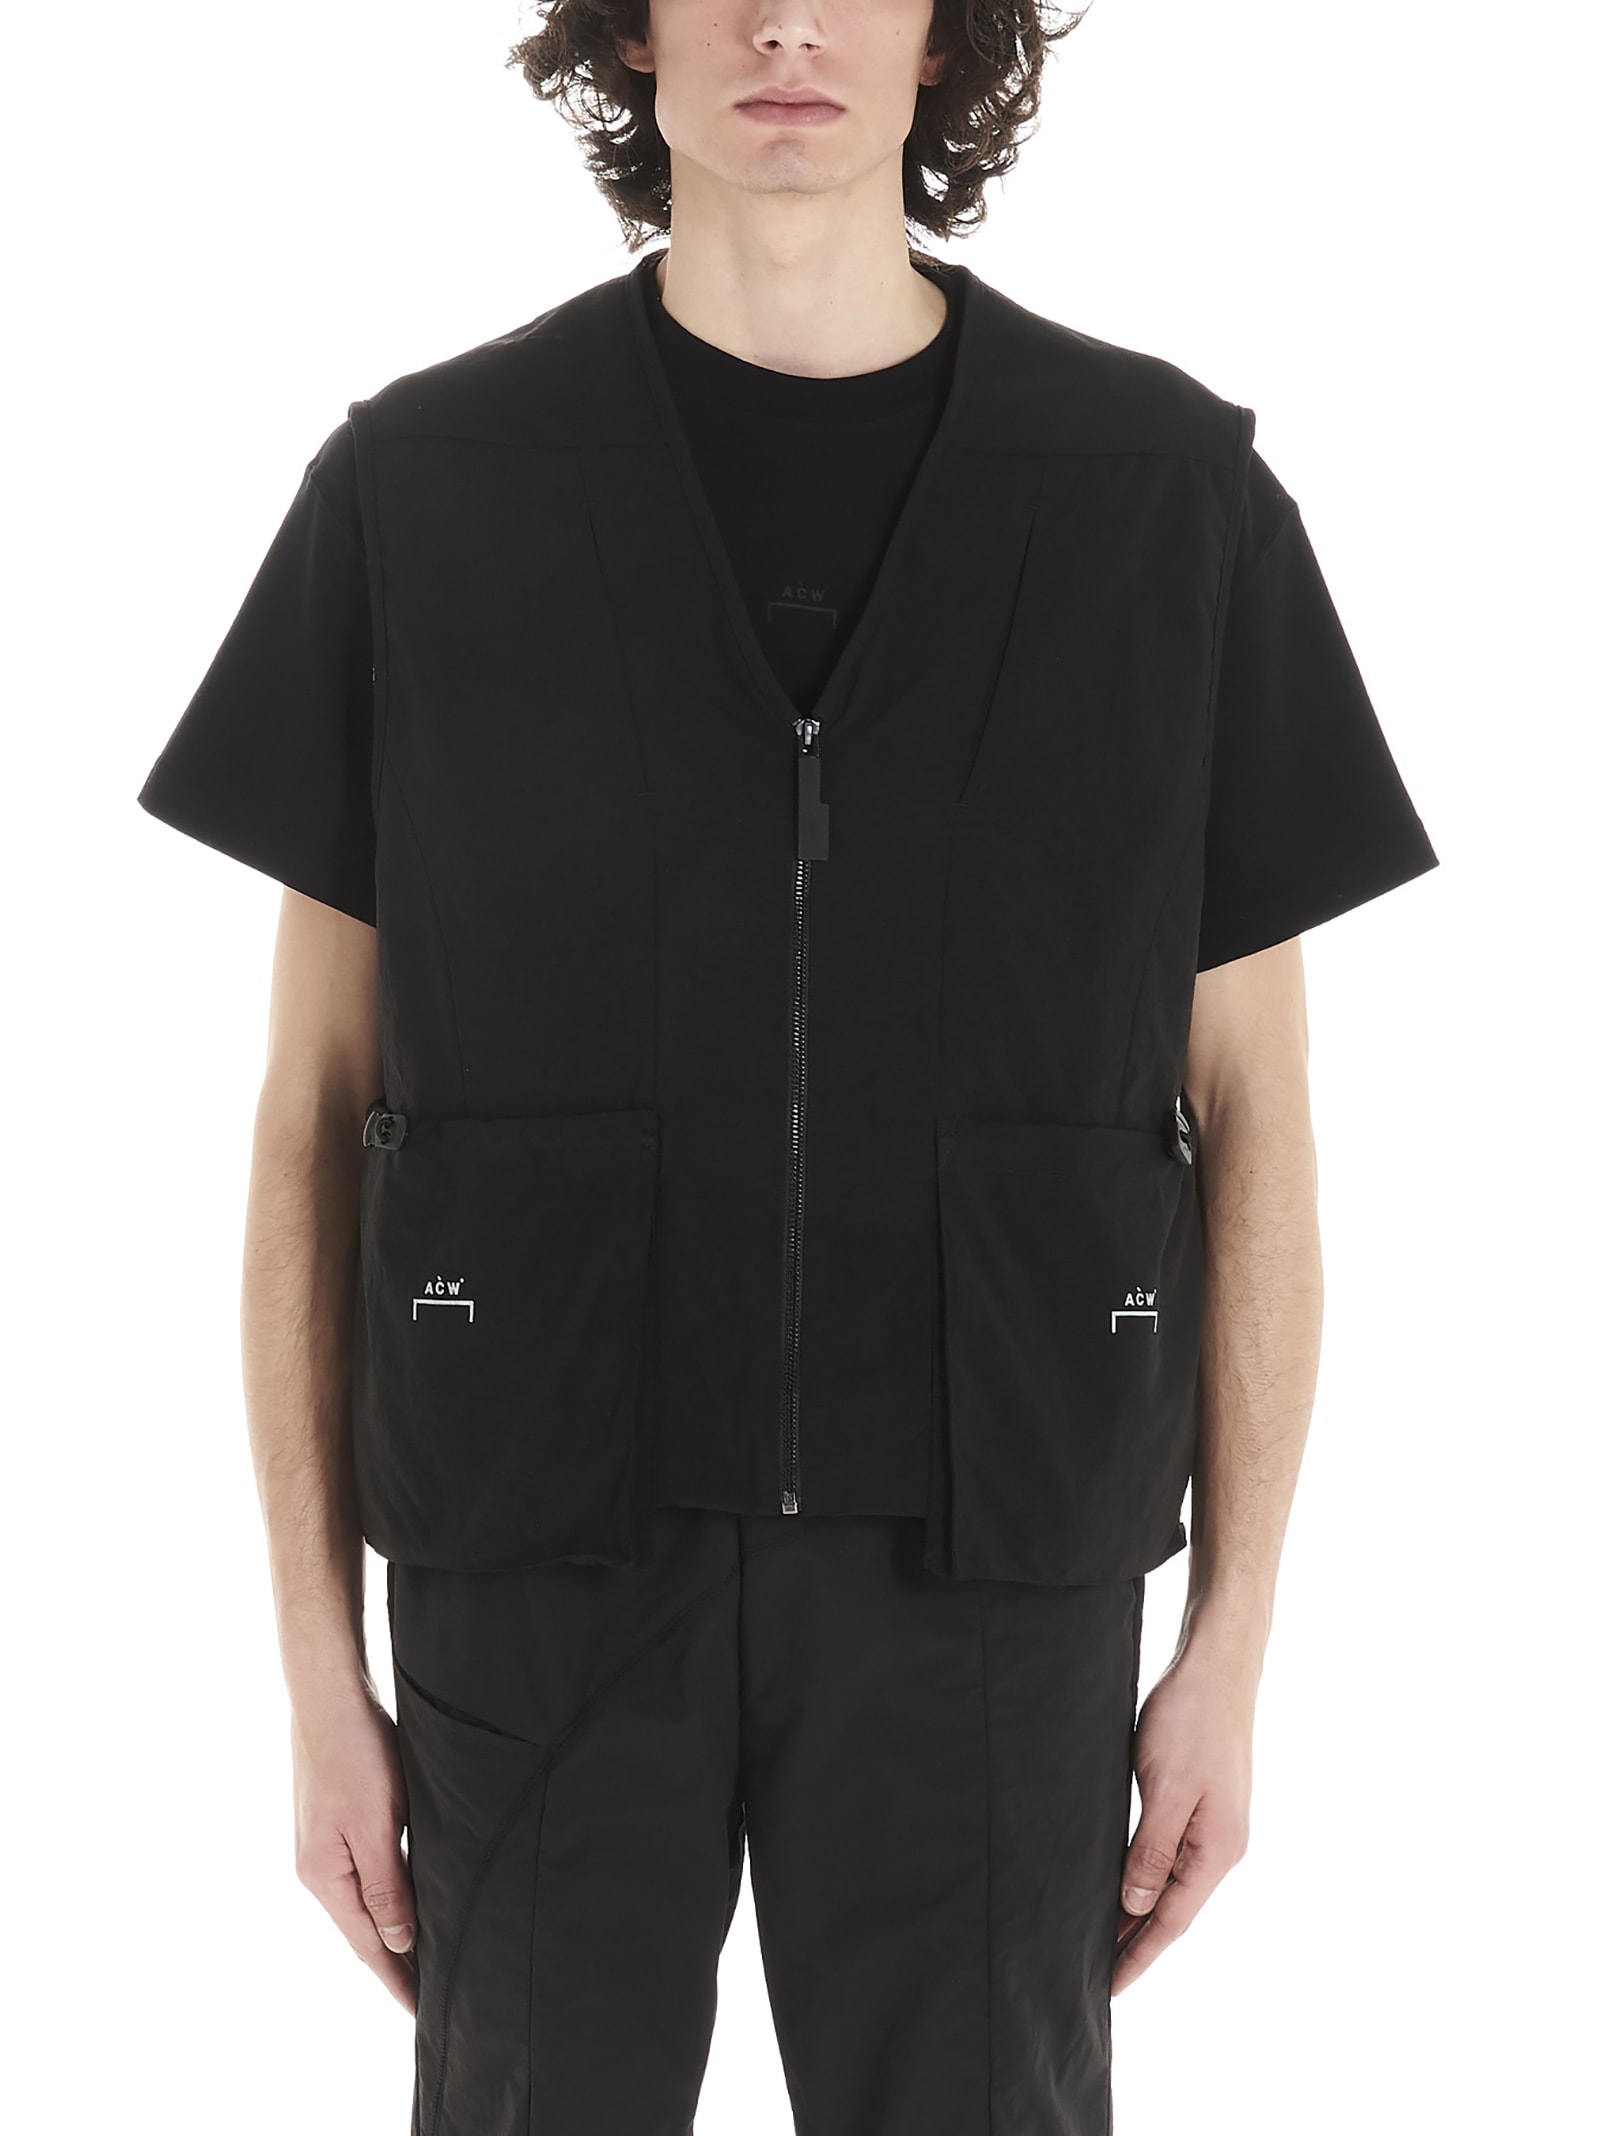 A-COLD-WALL* A-COLD-WALL VEST,11256022